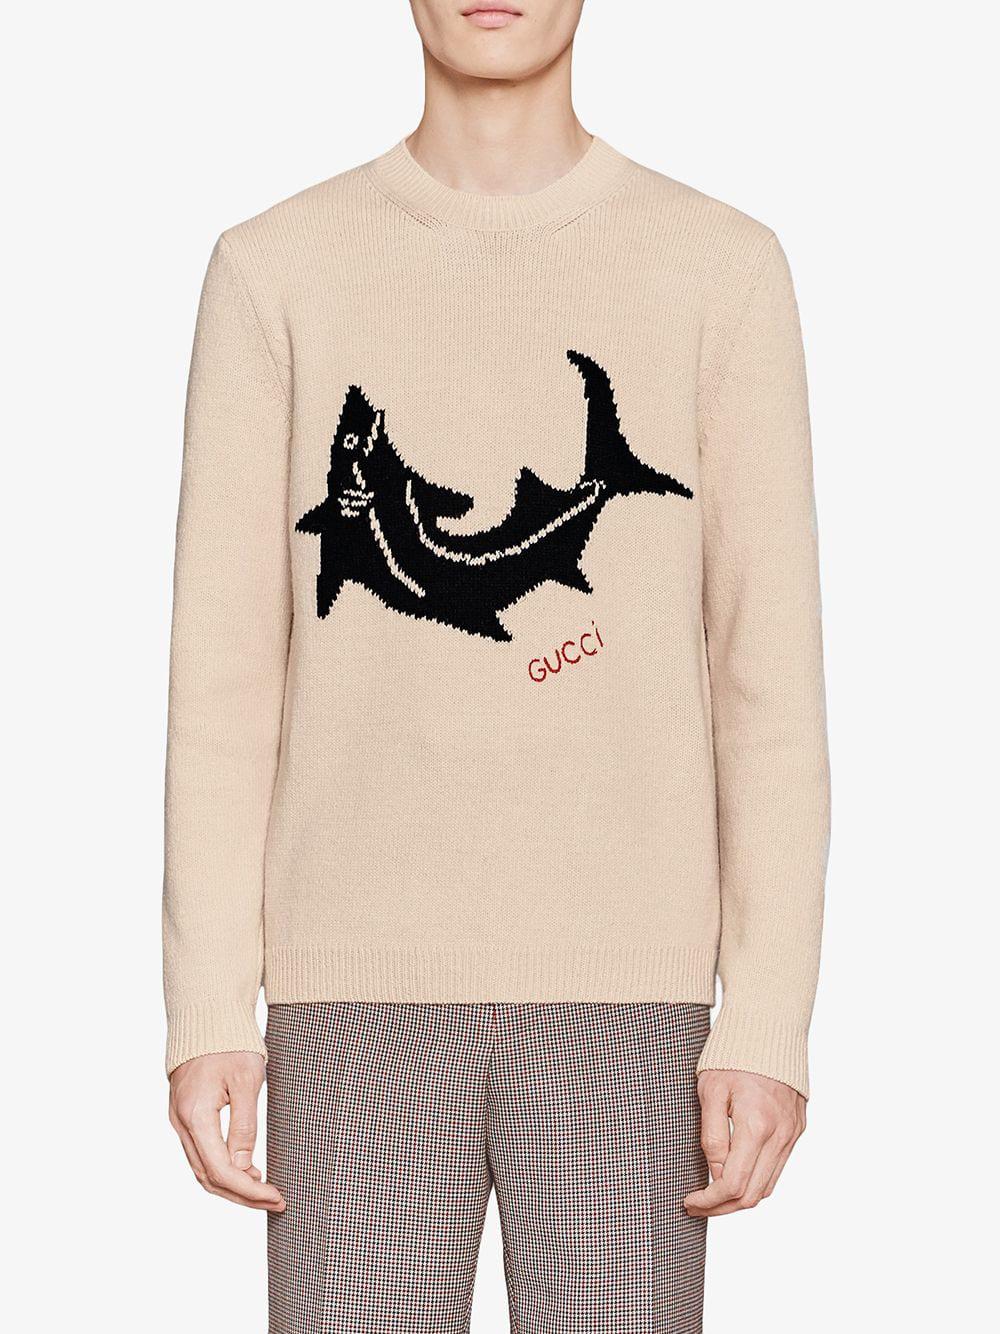 Gucci Wool Sweater With Shark in White for Men - Lyst